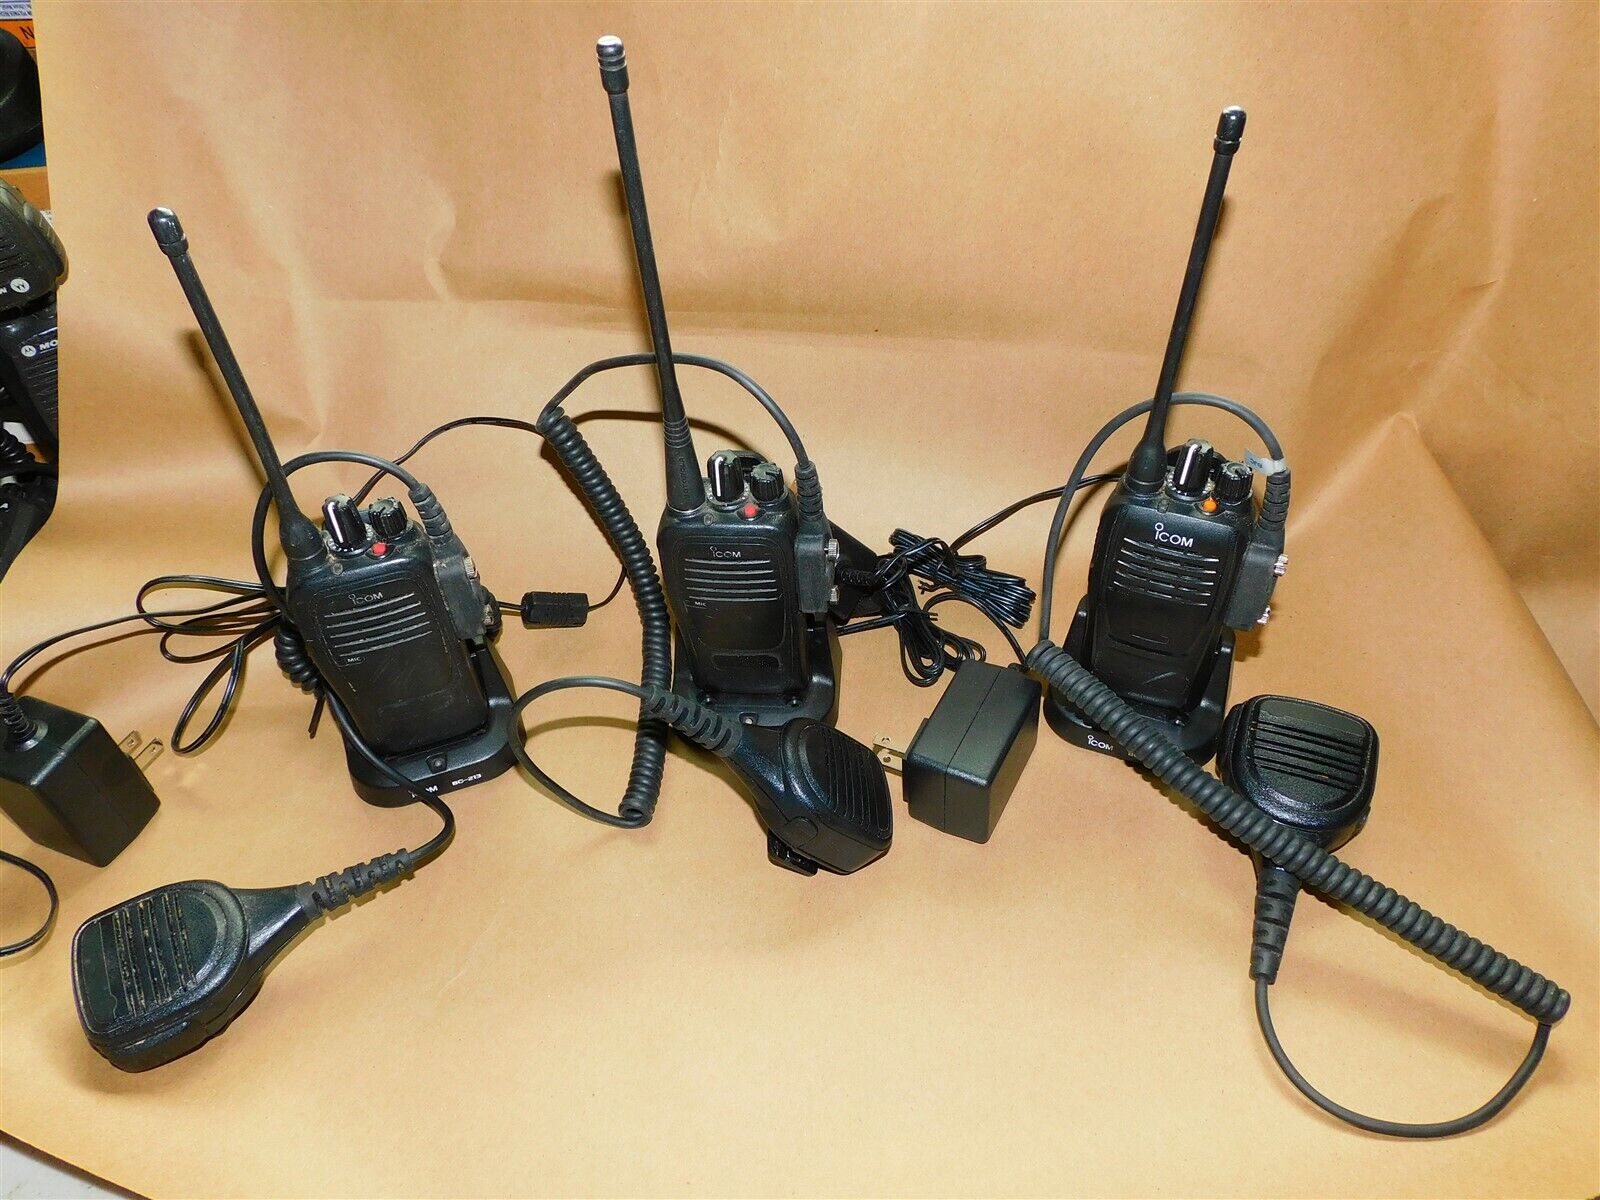 ICOM UHF Transceiver Hand Held Radio IC-F2000 with Charger and Microphone 3 sets Icom IC-F2000